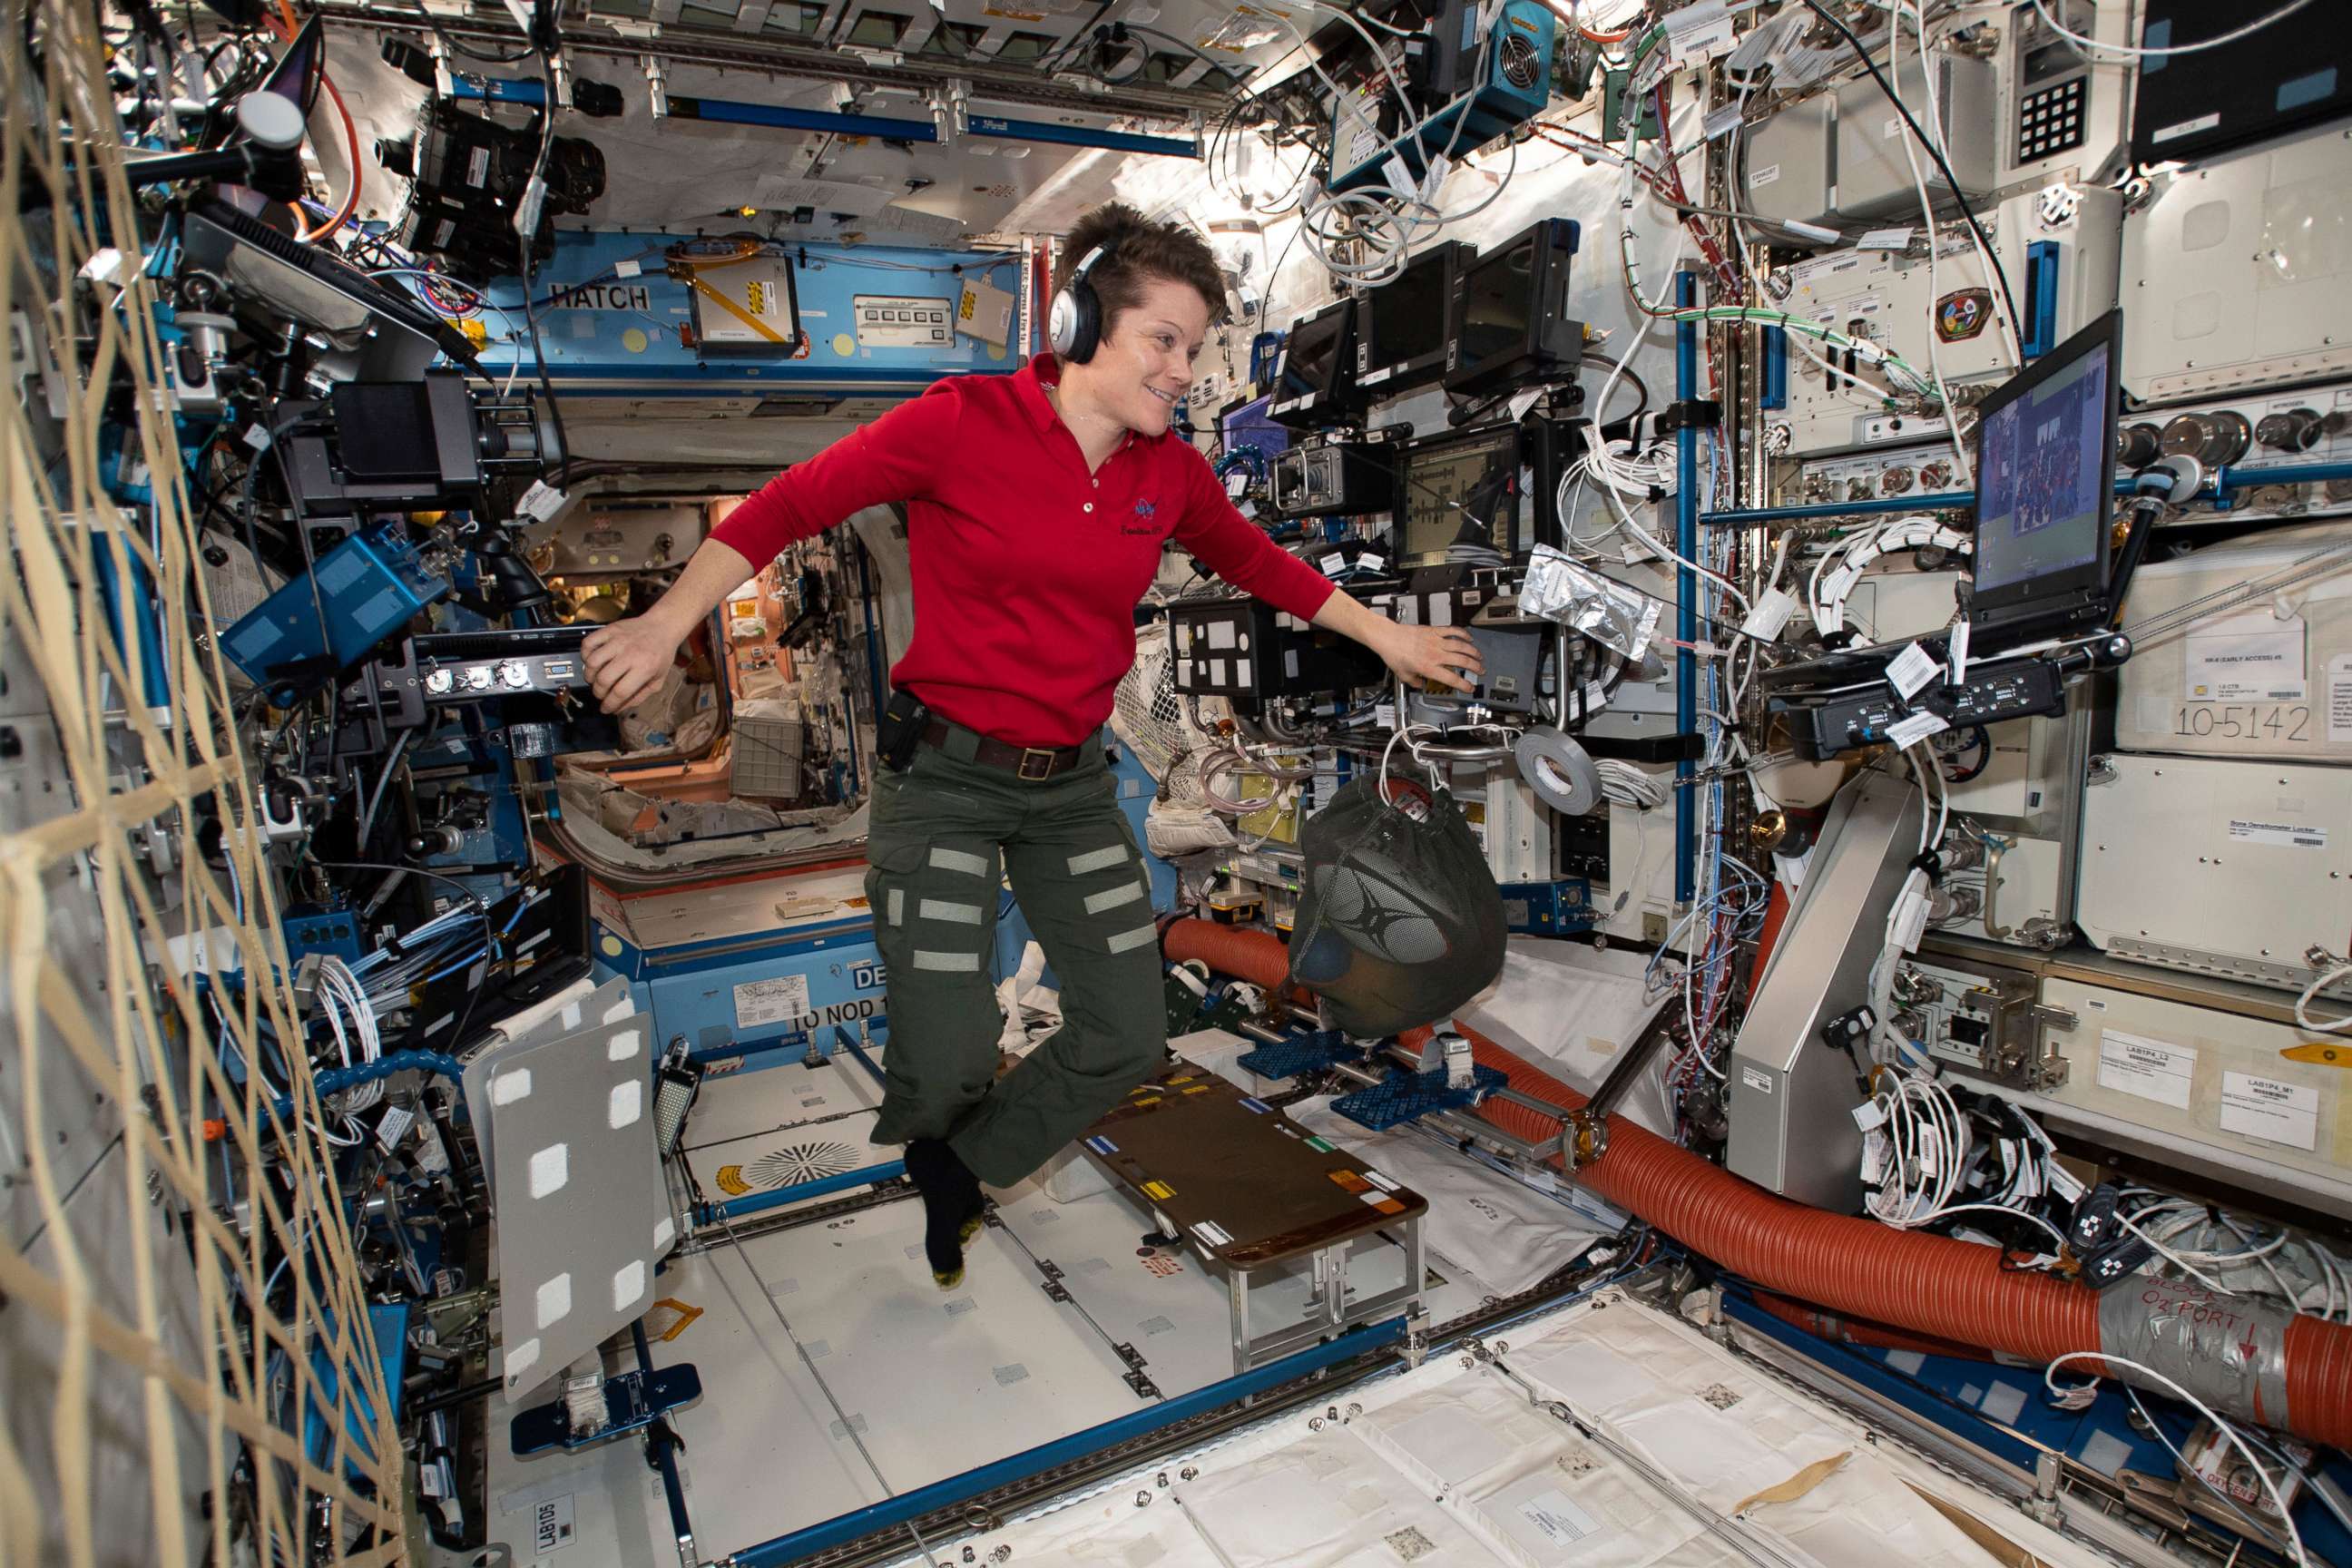 PHOTO: In this Jan. 18, 2019 photo made available by NASA, Flight Engineer Anne McClain looks at a laptop computer screen inside the U.S. Destiny laboratory module of the International Space Station.